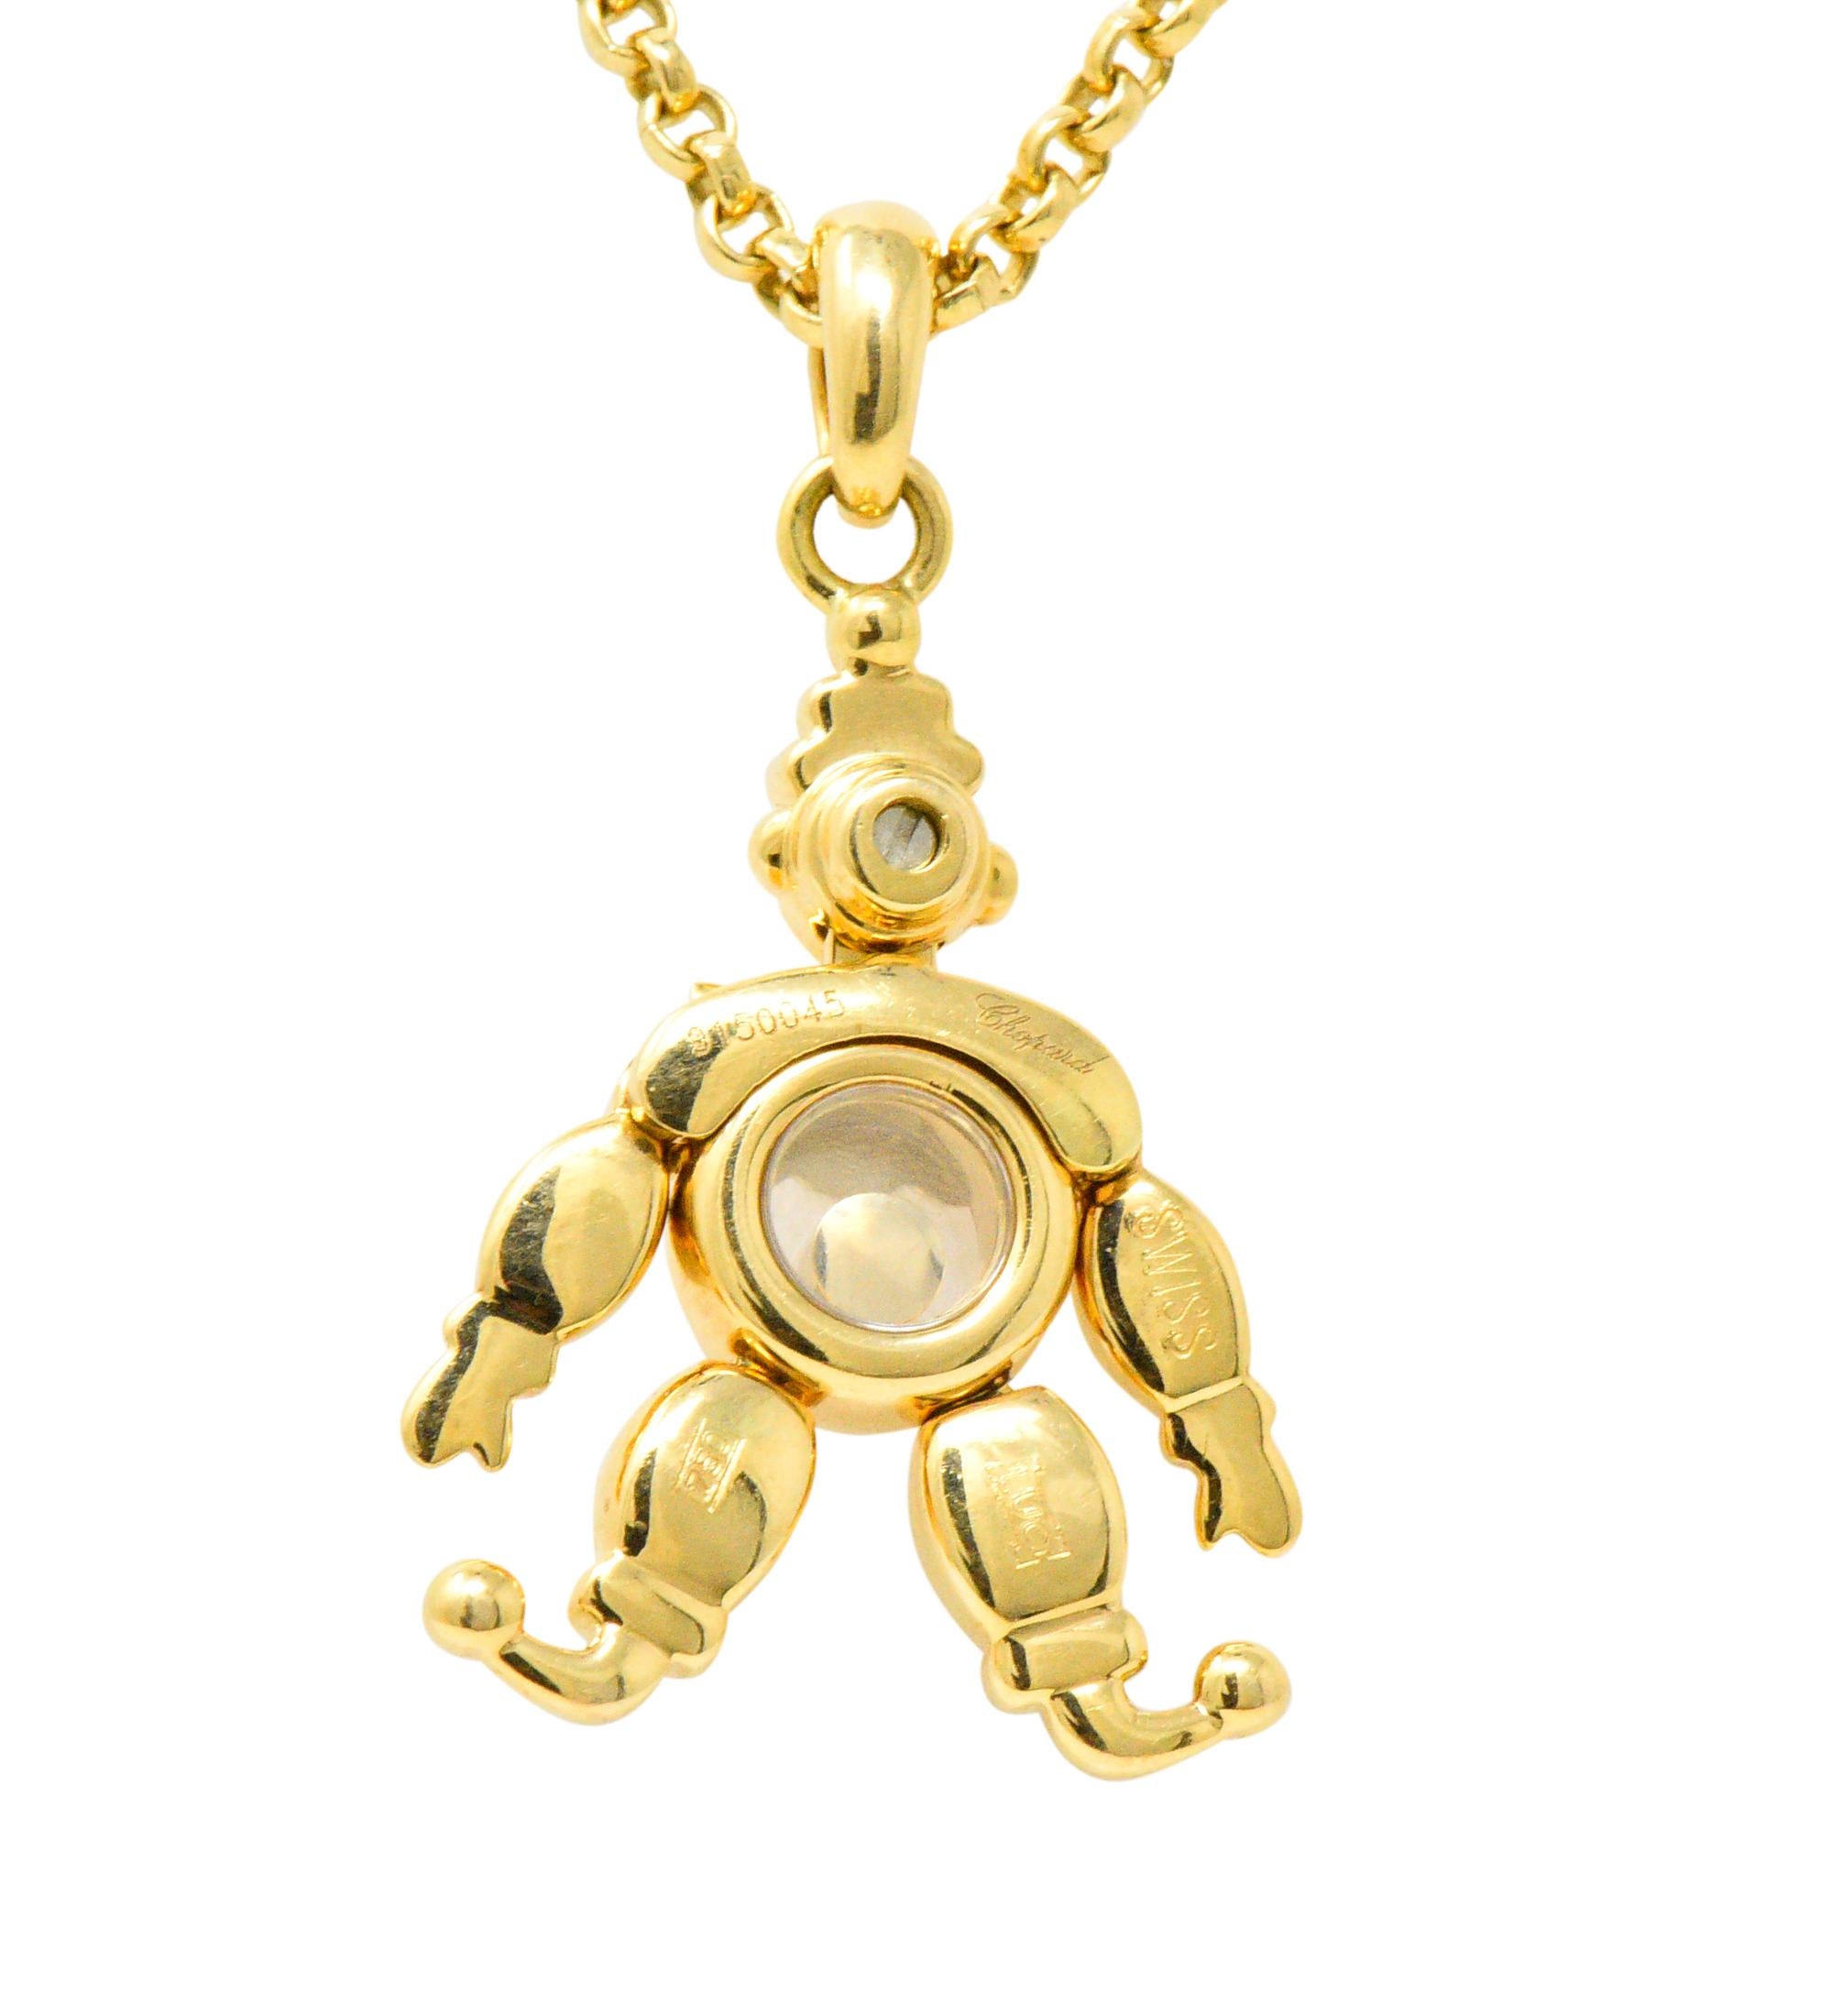 Chopard Clown from the HAPPY DIAMONDS collection

Articulated with moving arms and legs 

Crystal cased body featuring bezel set 0.05 carat freely moving diamond, E color and VS clarity

Rolo chain link with lobster clasp 

Chain Measures: 16 1/4